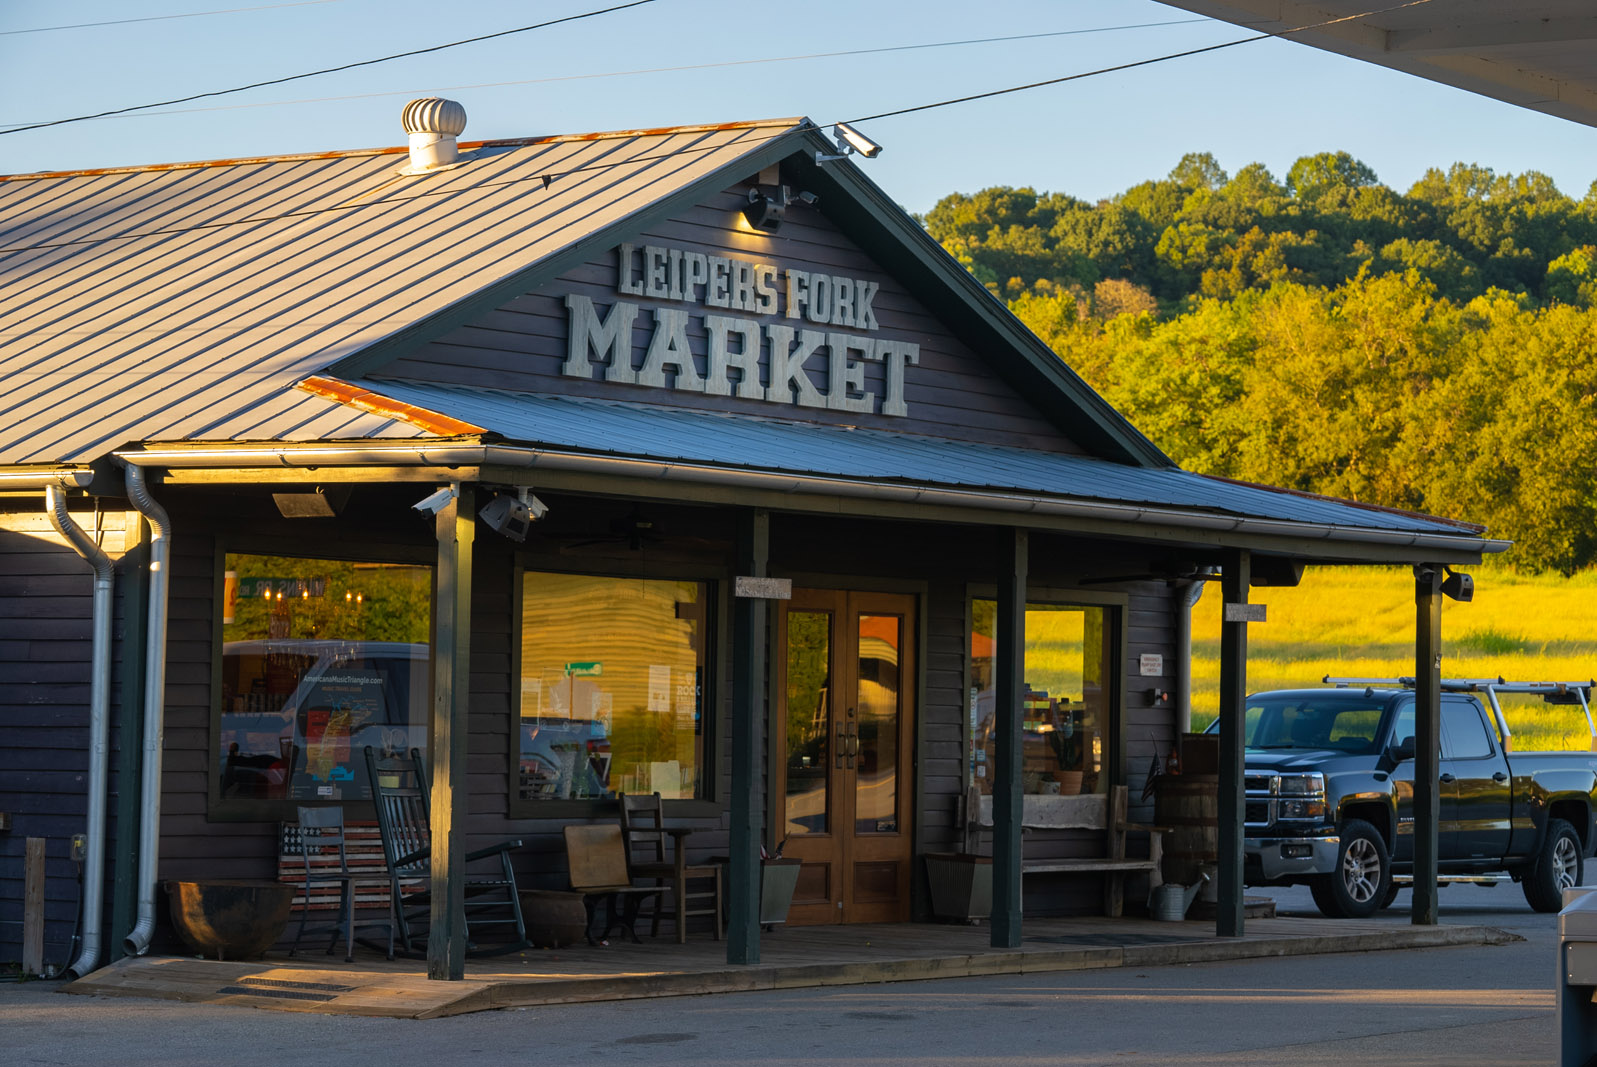 Leipers Fork Market in Tennessee